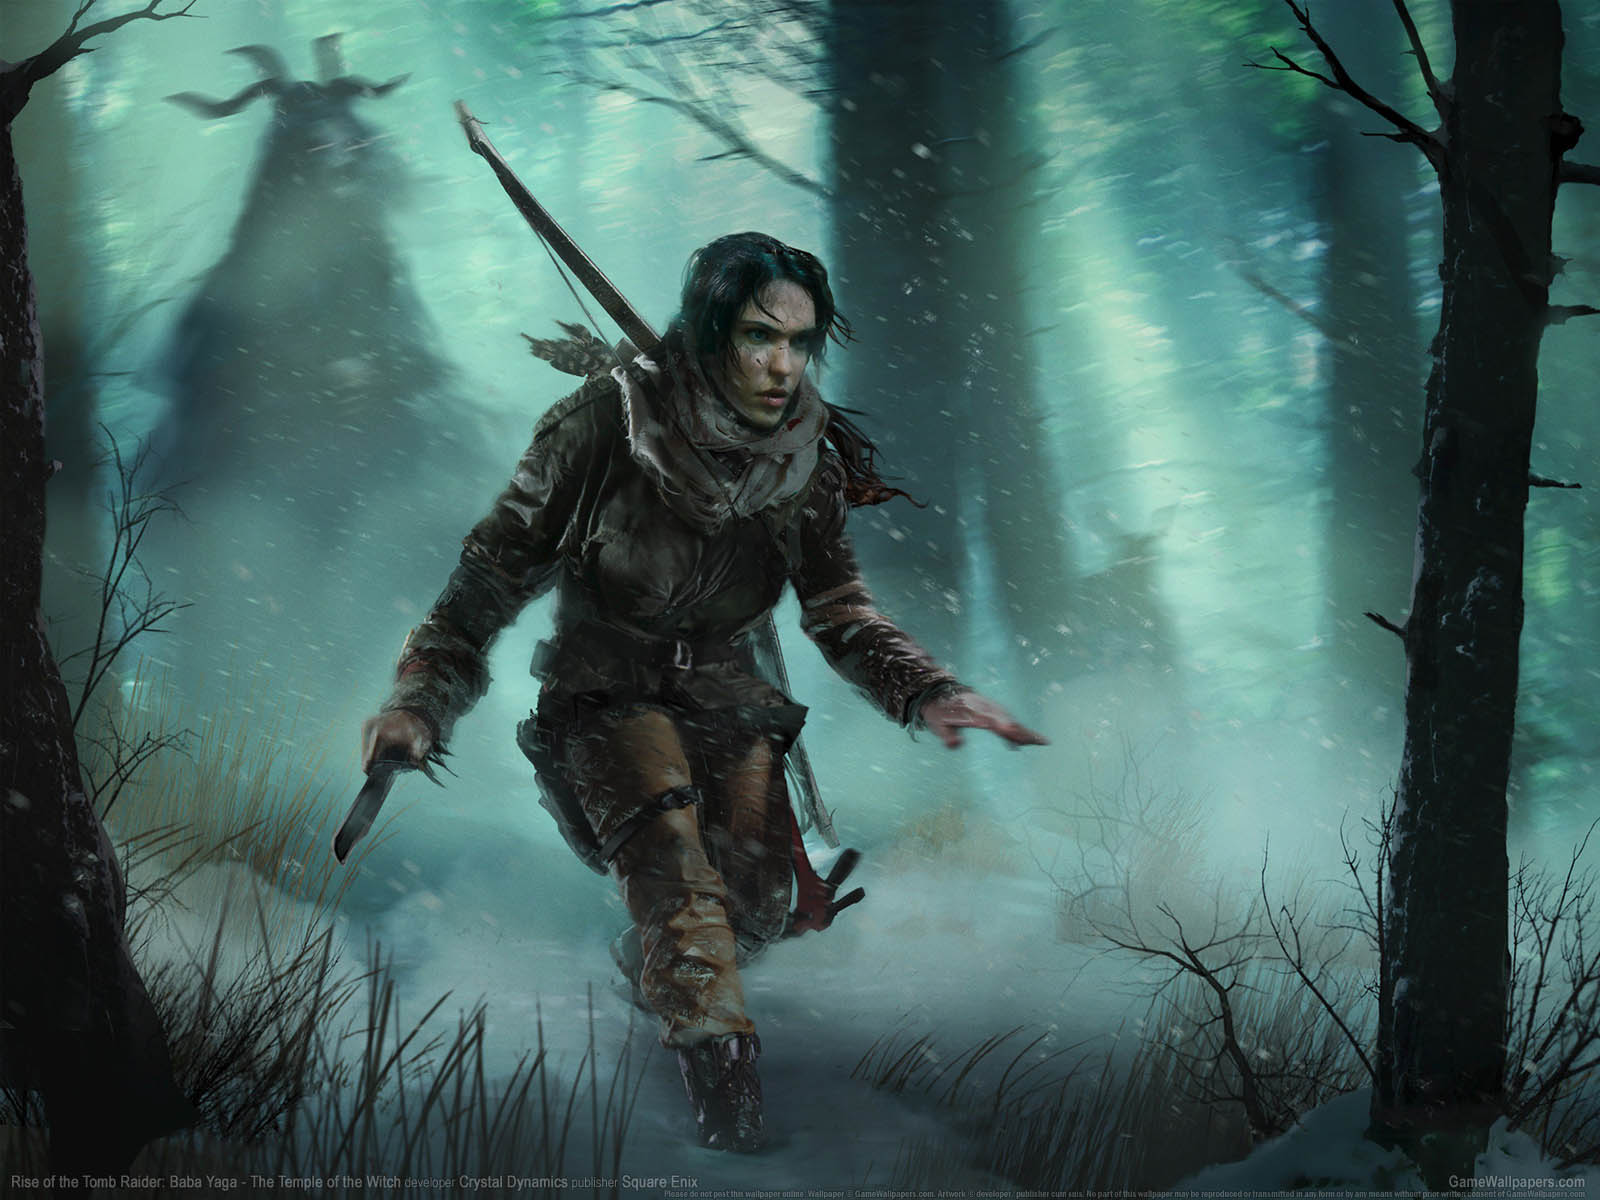 Rise of the Tomb Raider%2525252525253A Baba Yaga - The Temple of the Witch wallpaper 01 1600x1200